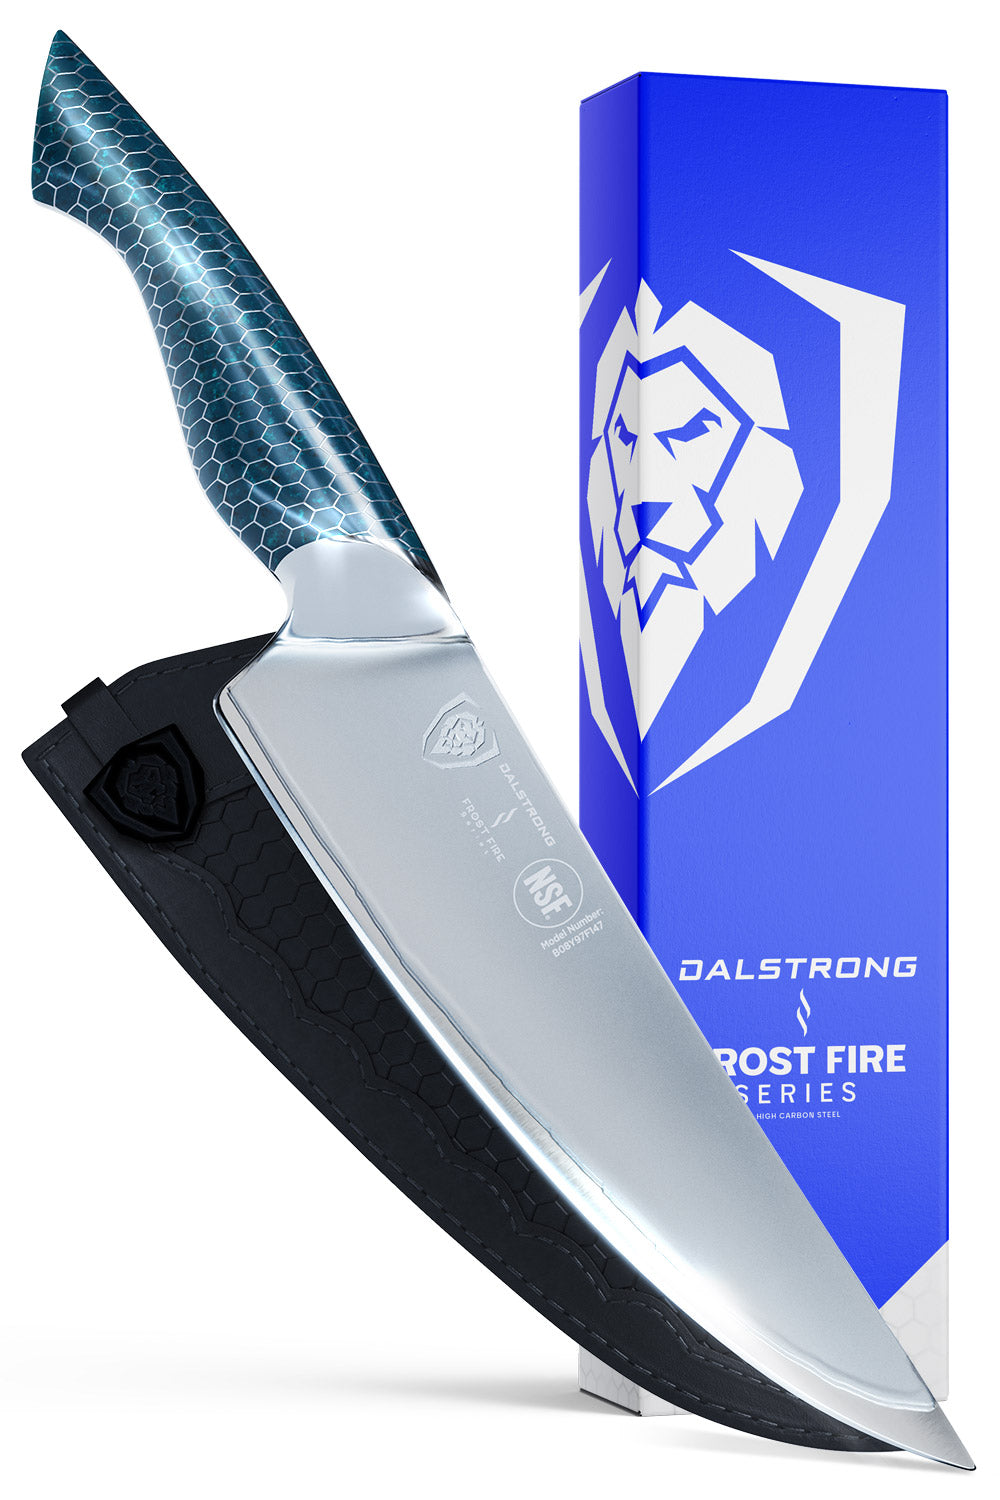 Dalstrong frost fire series 8 inch chef knife with blue honeycomb handle in front of it's premium packaging.